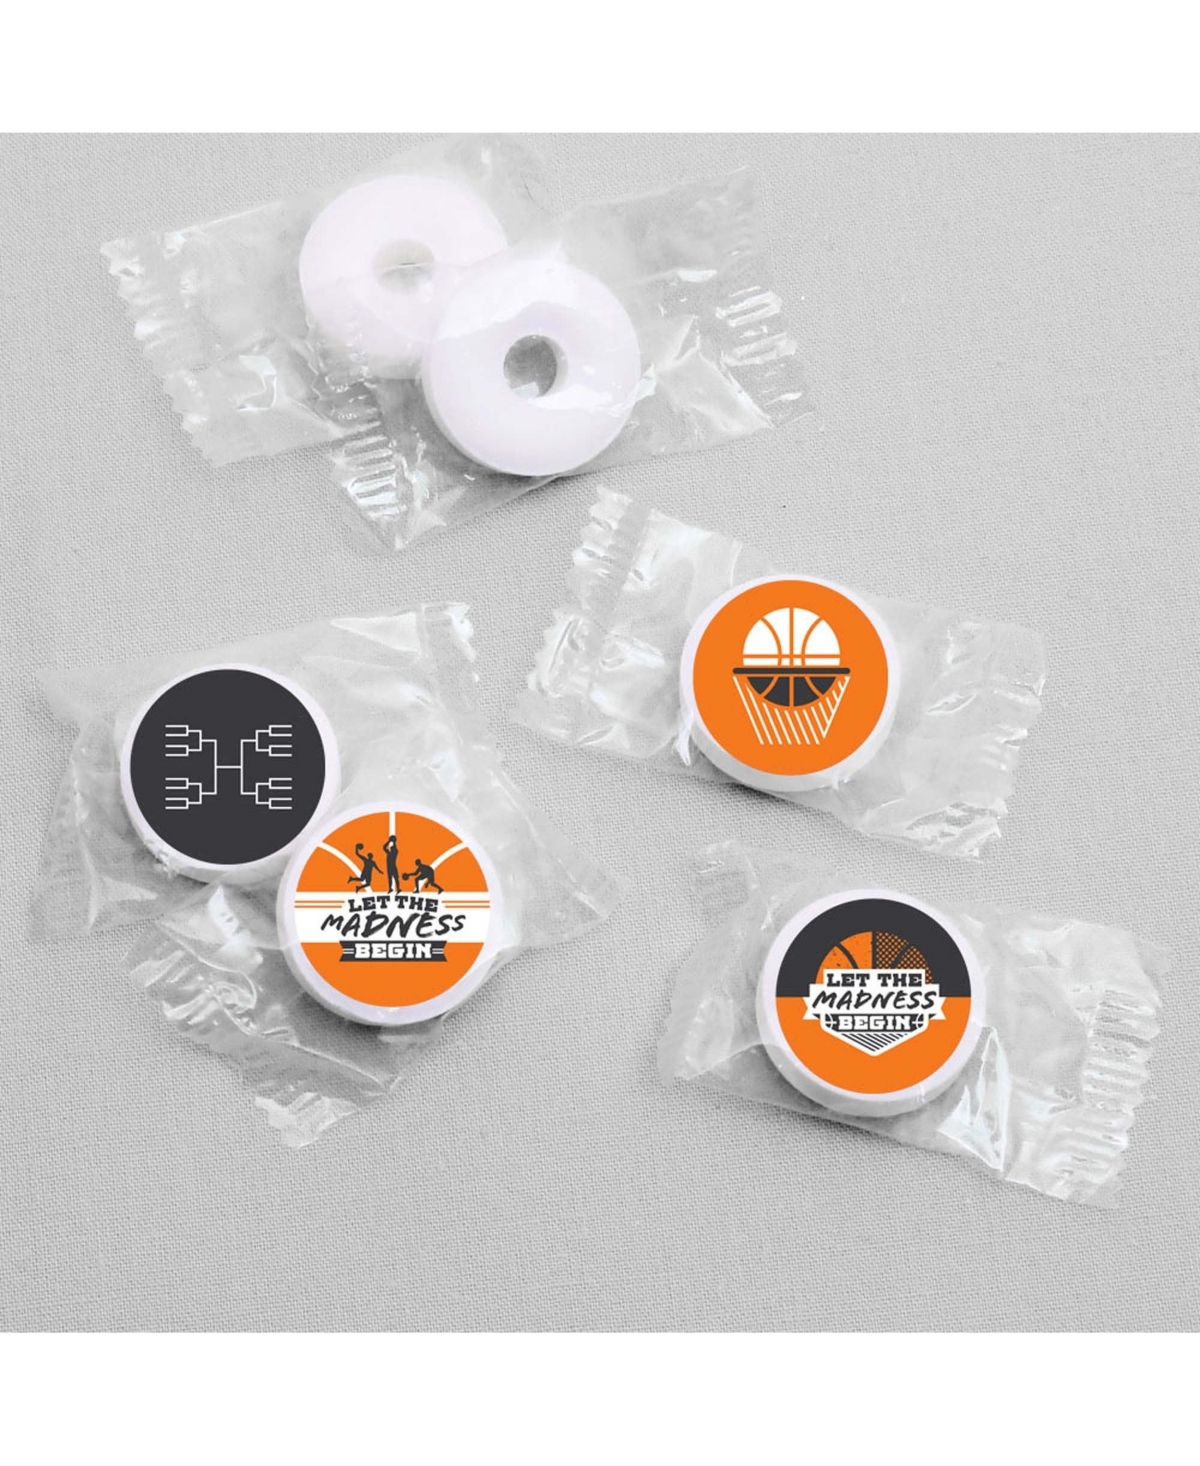 Big Dot Of Happiness Set the Pace - Running - Small Round Candy Stickers  Party Favor Labels - 324 Ct